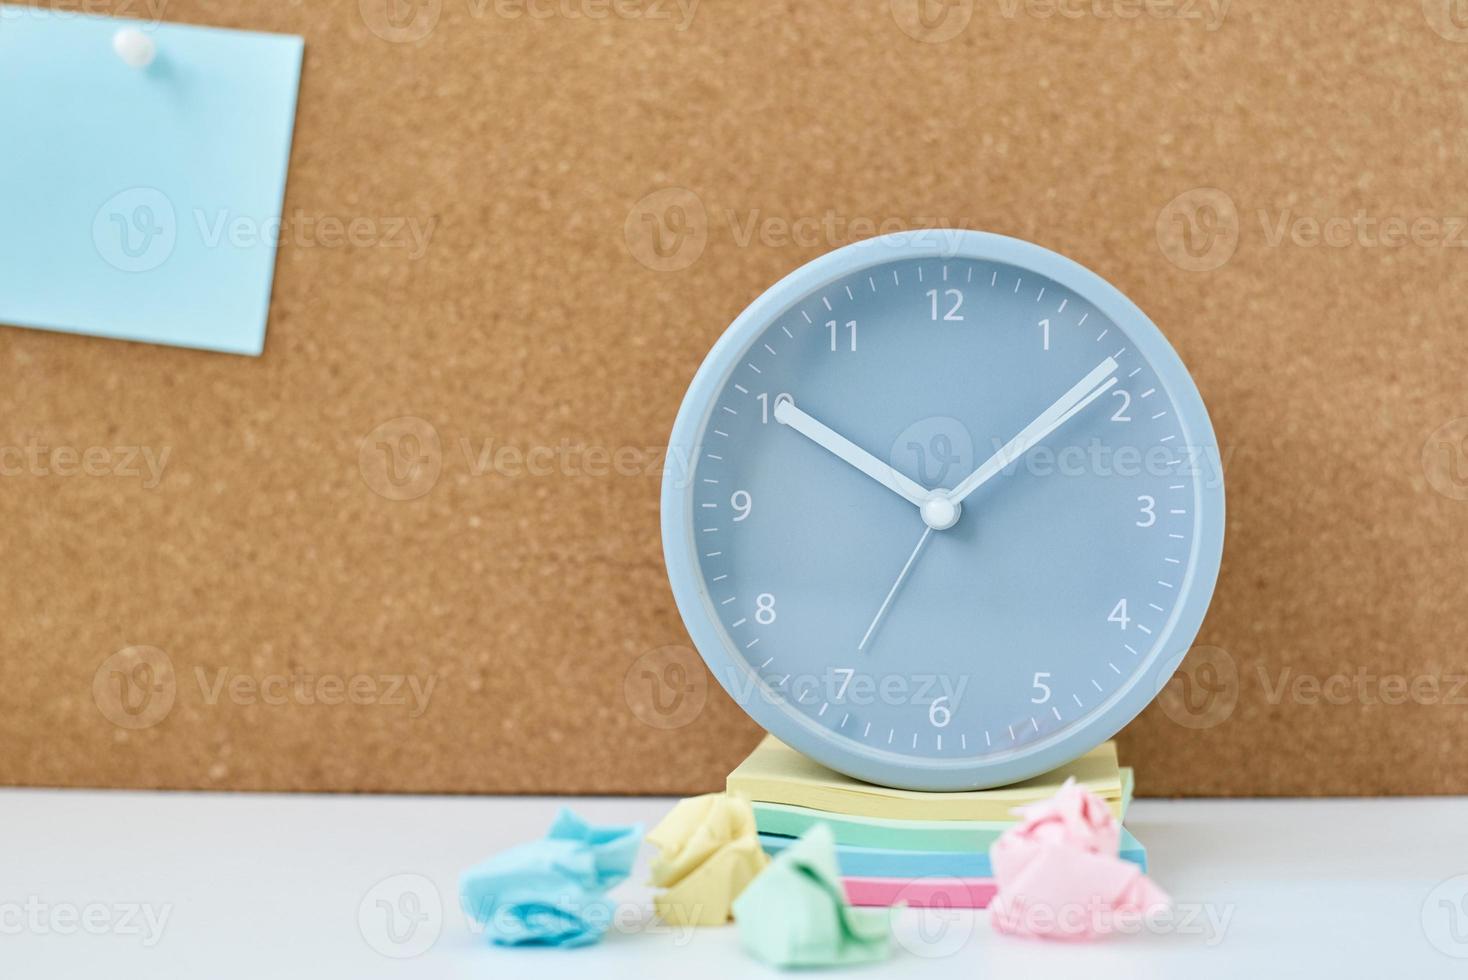 Sticky notes on a cork board and alarm clock in workplace office or home photo